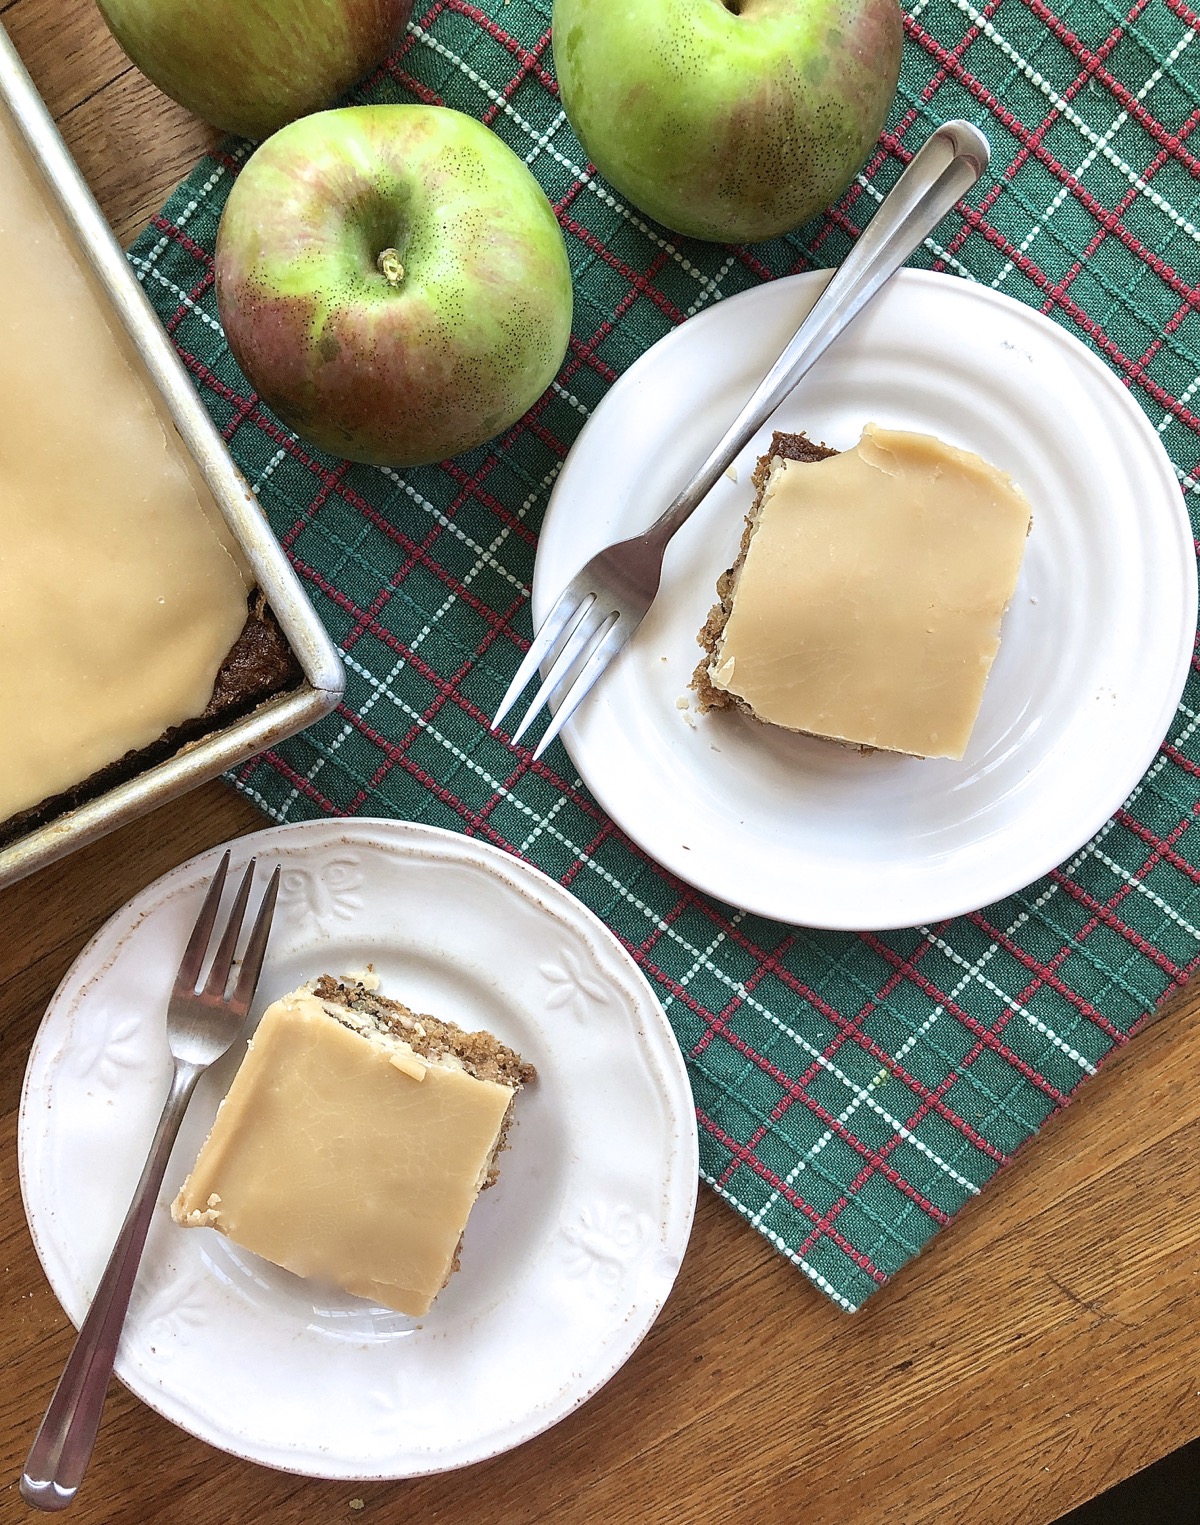 Apple cake with brown sugar frosting cut into squares and served on plates.